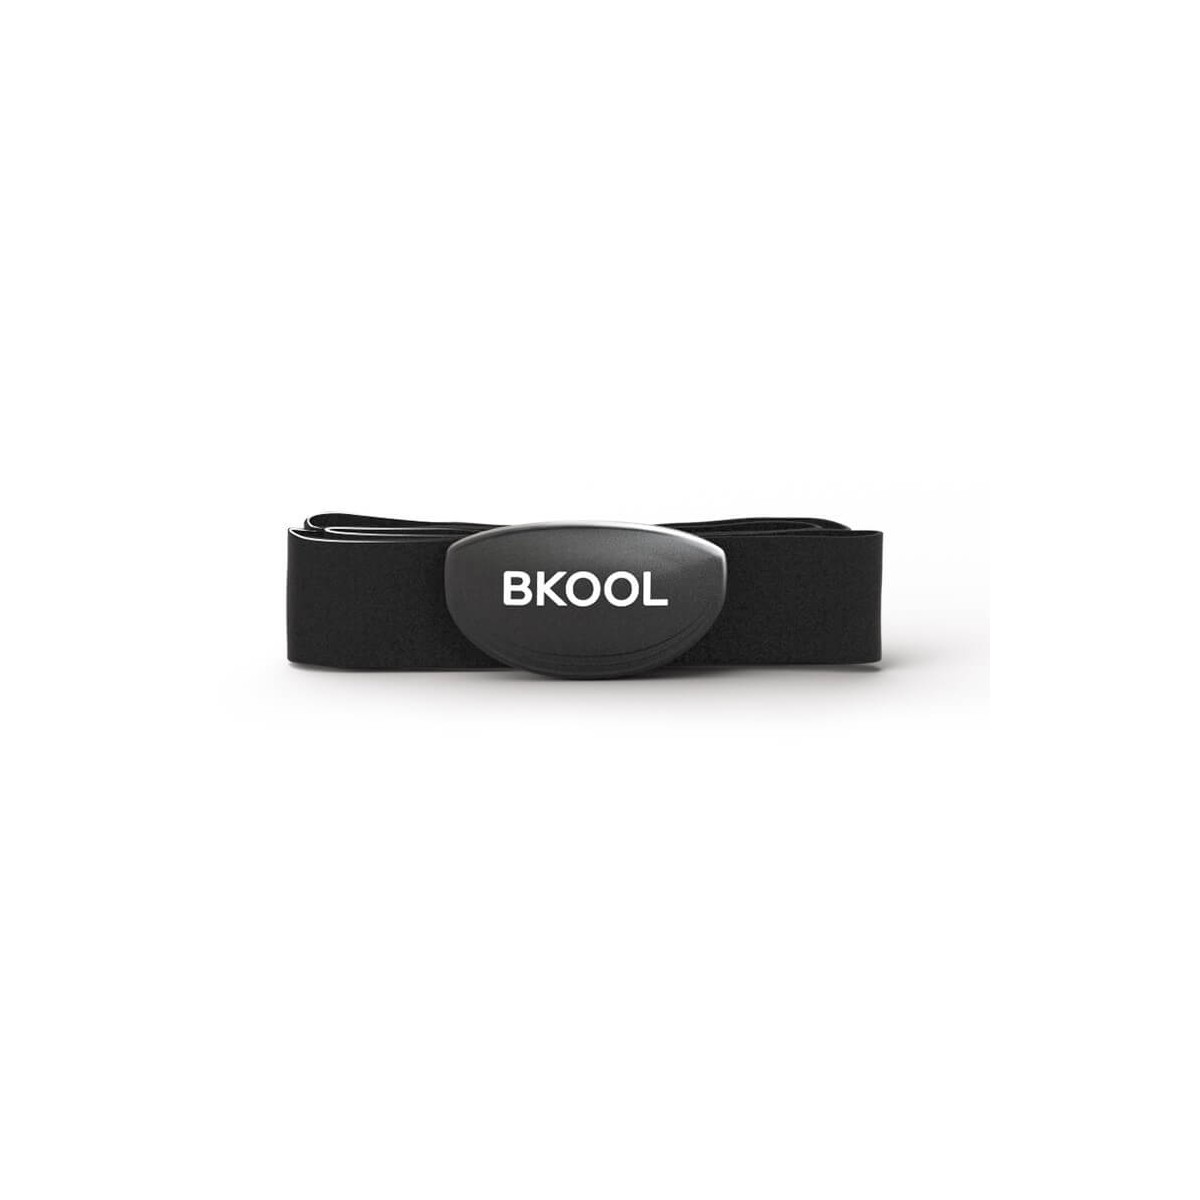 Bkool HRM heart rate monitor